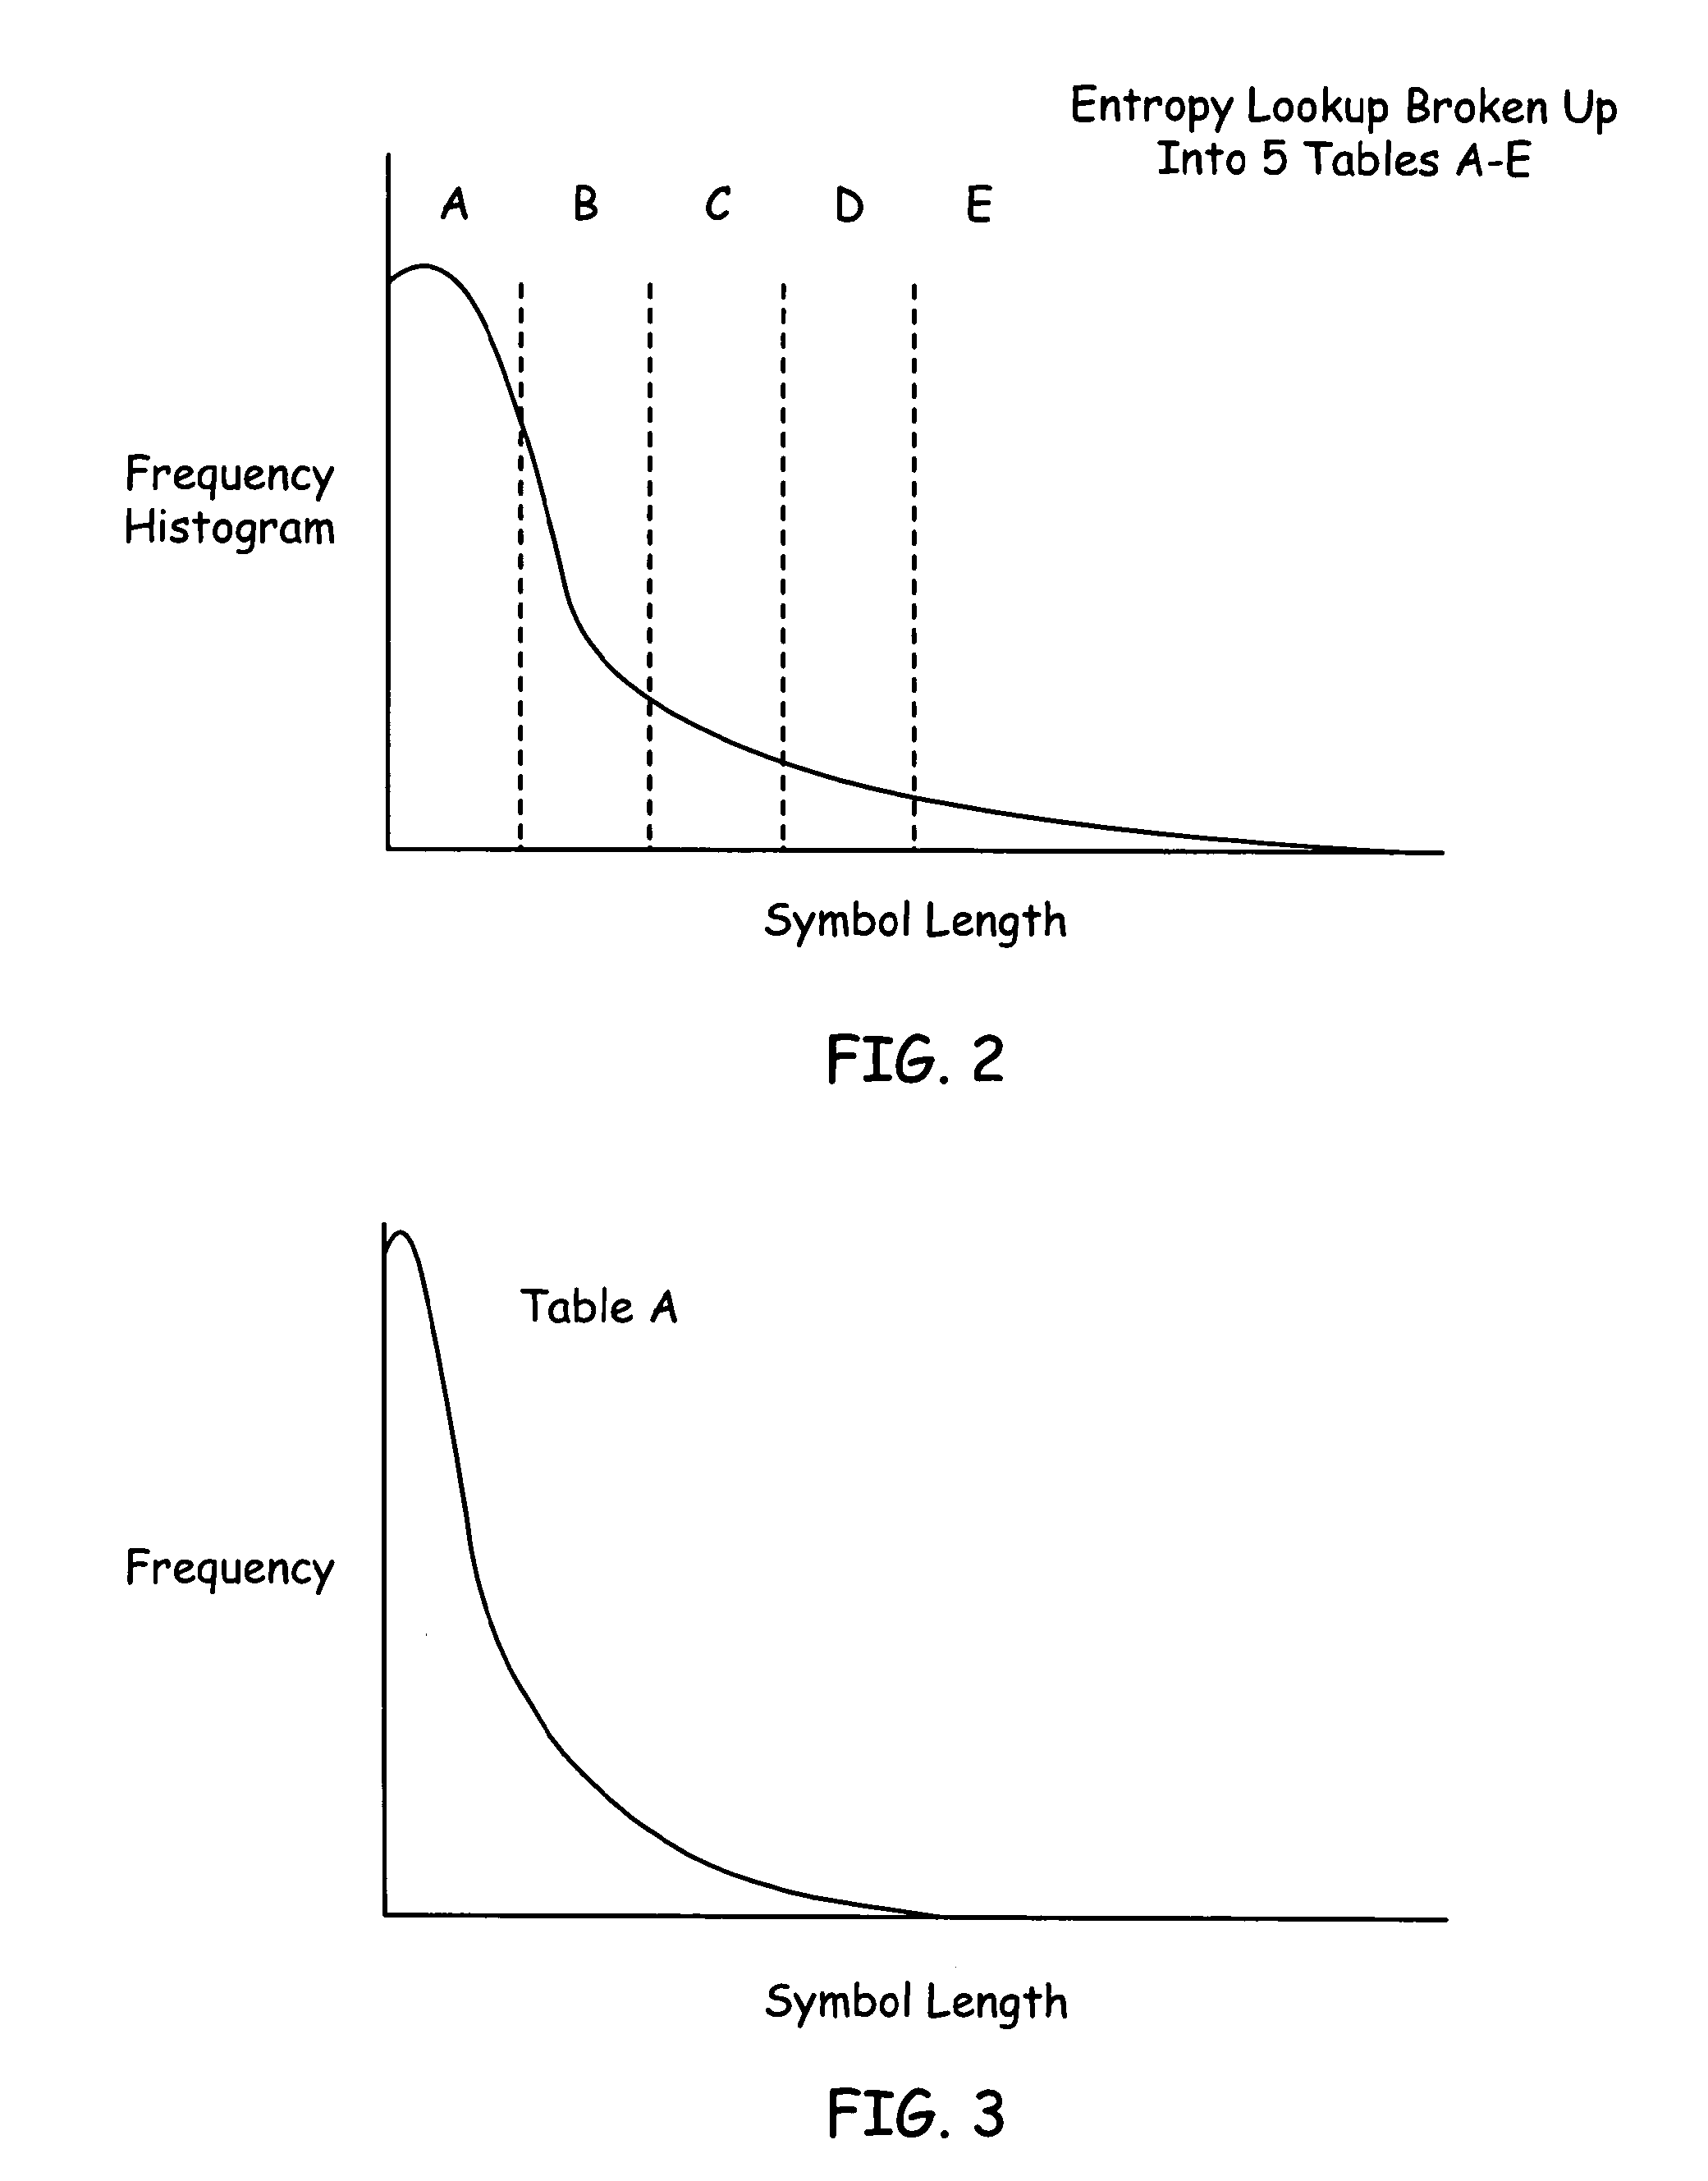 Method and system for memory usage in real-time audio systems